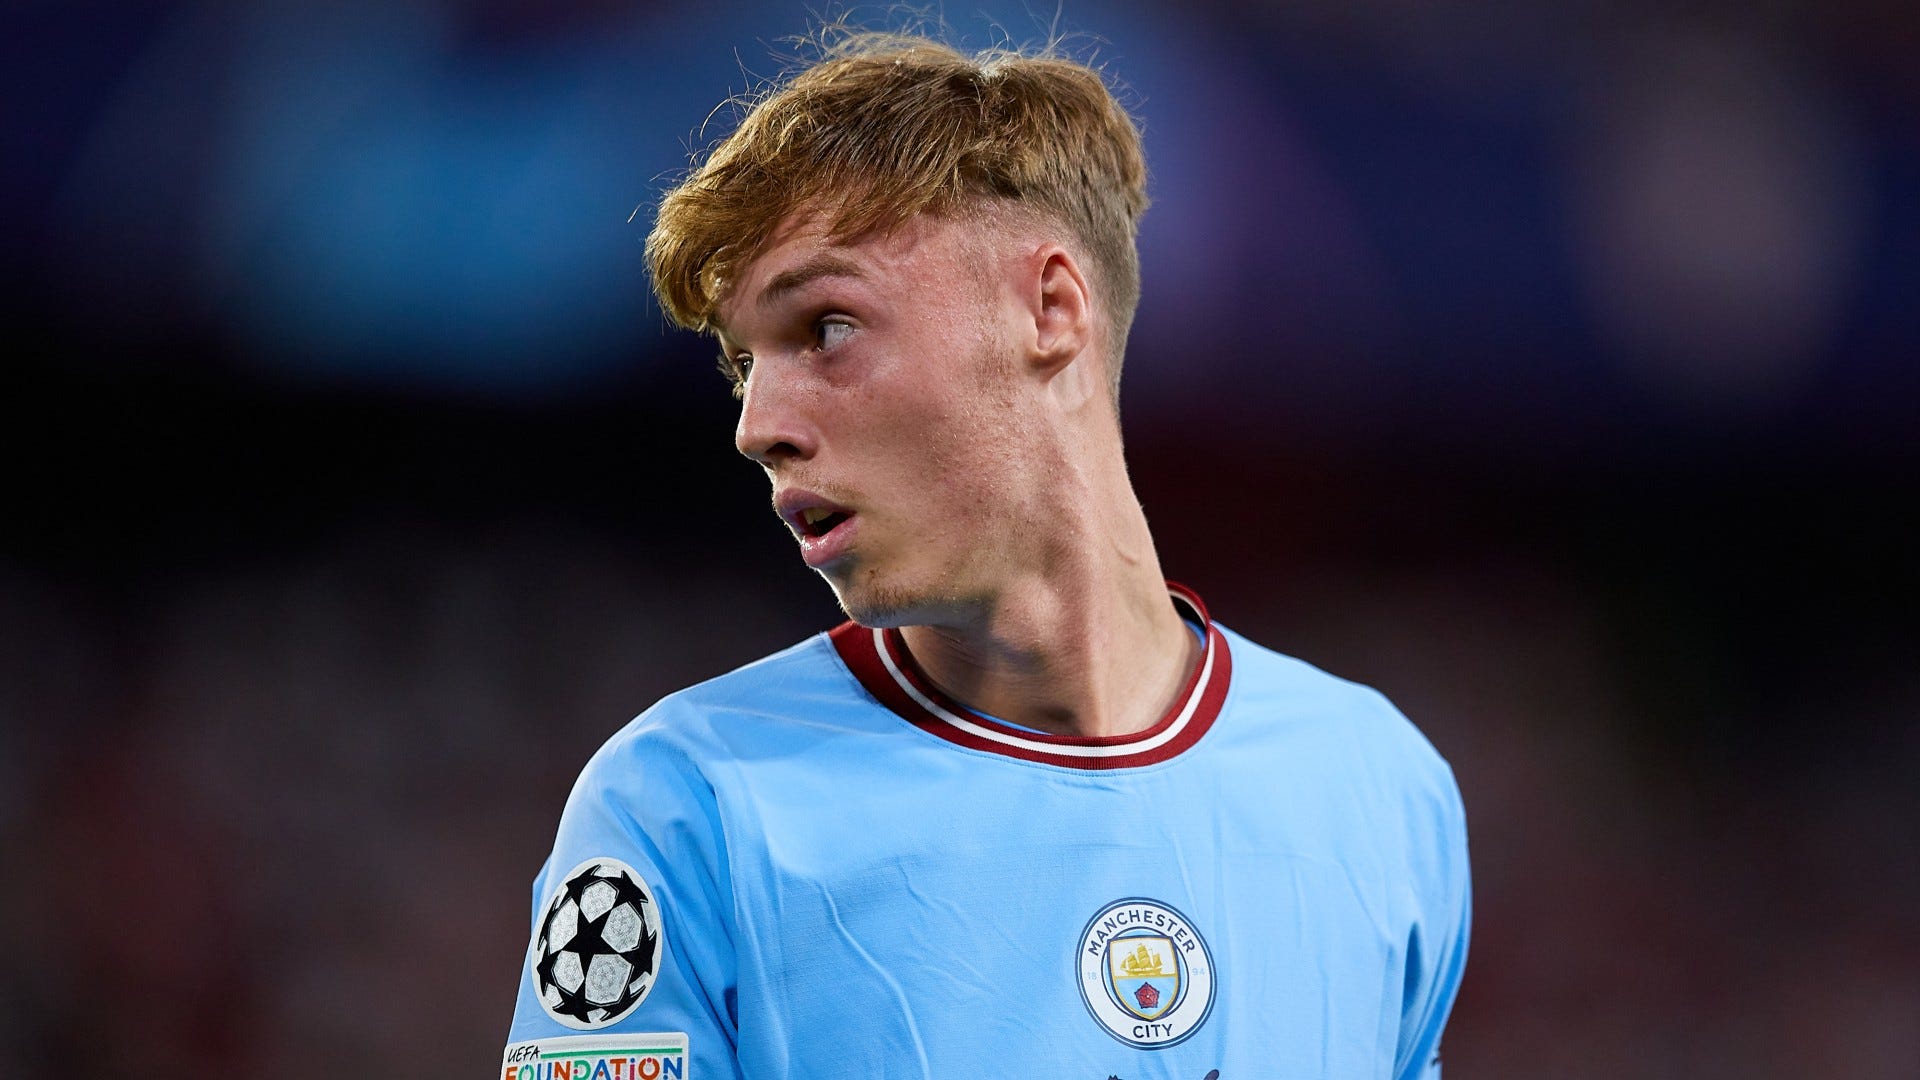 Chelsea transfer news and rumours today Blues told to shell out £45m to sign Cole Palmer from Manchester City Goal US